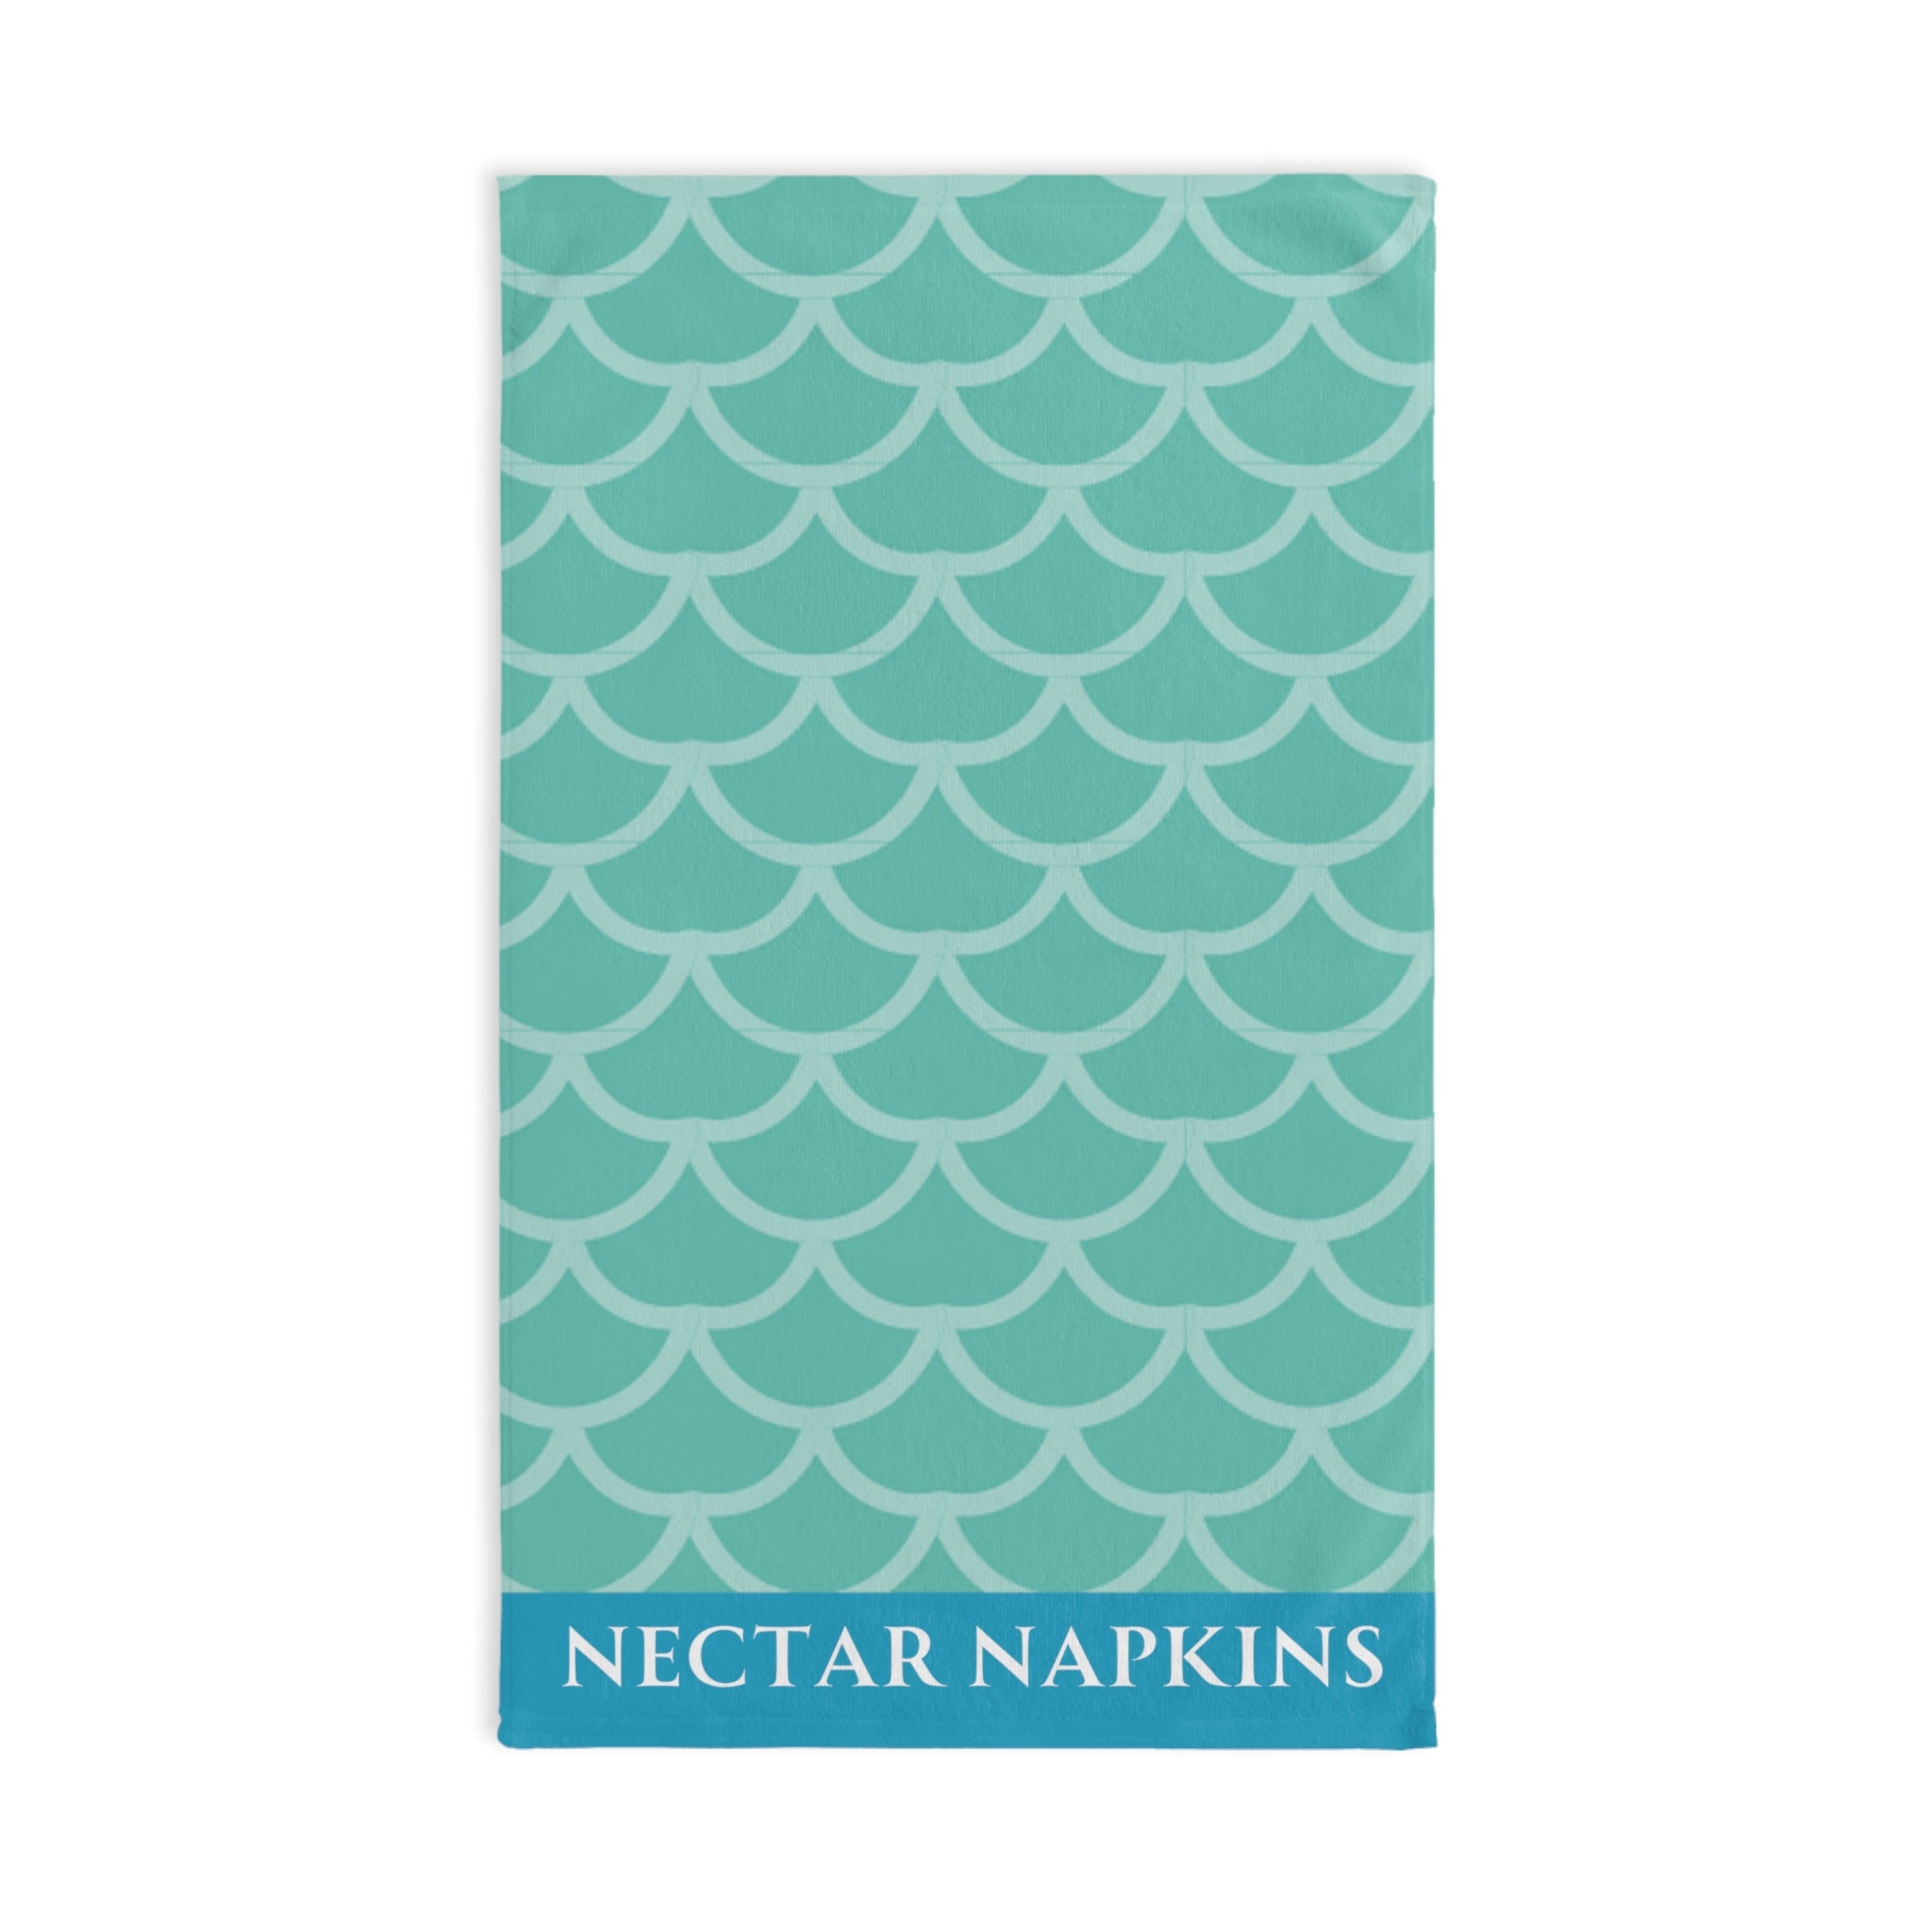 Mermaid Tail Mint Teal | Novelty Gifts for Boyfriend, Funny Towel Romantic Gift for Wedding Couple Fiance First Year Anniversary Valentines, Party Gag Gifts, Joke Humor Cloth for Husband Men BF NECTAR NAPKINS